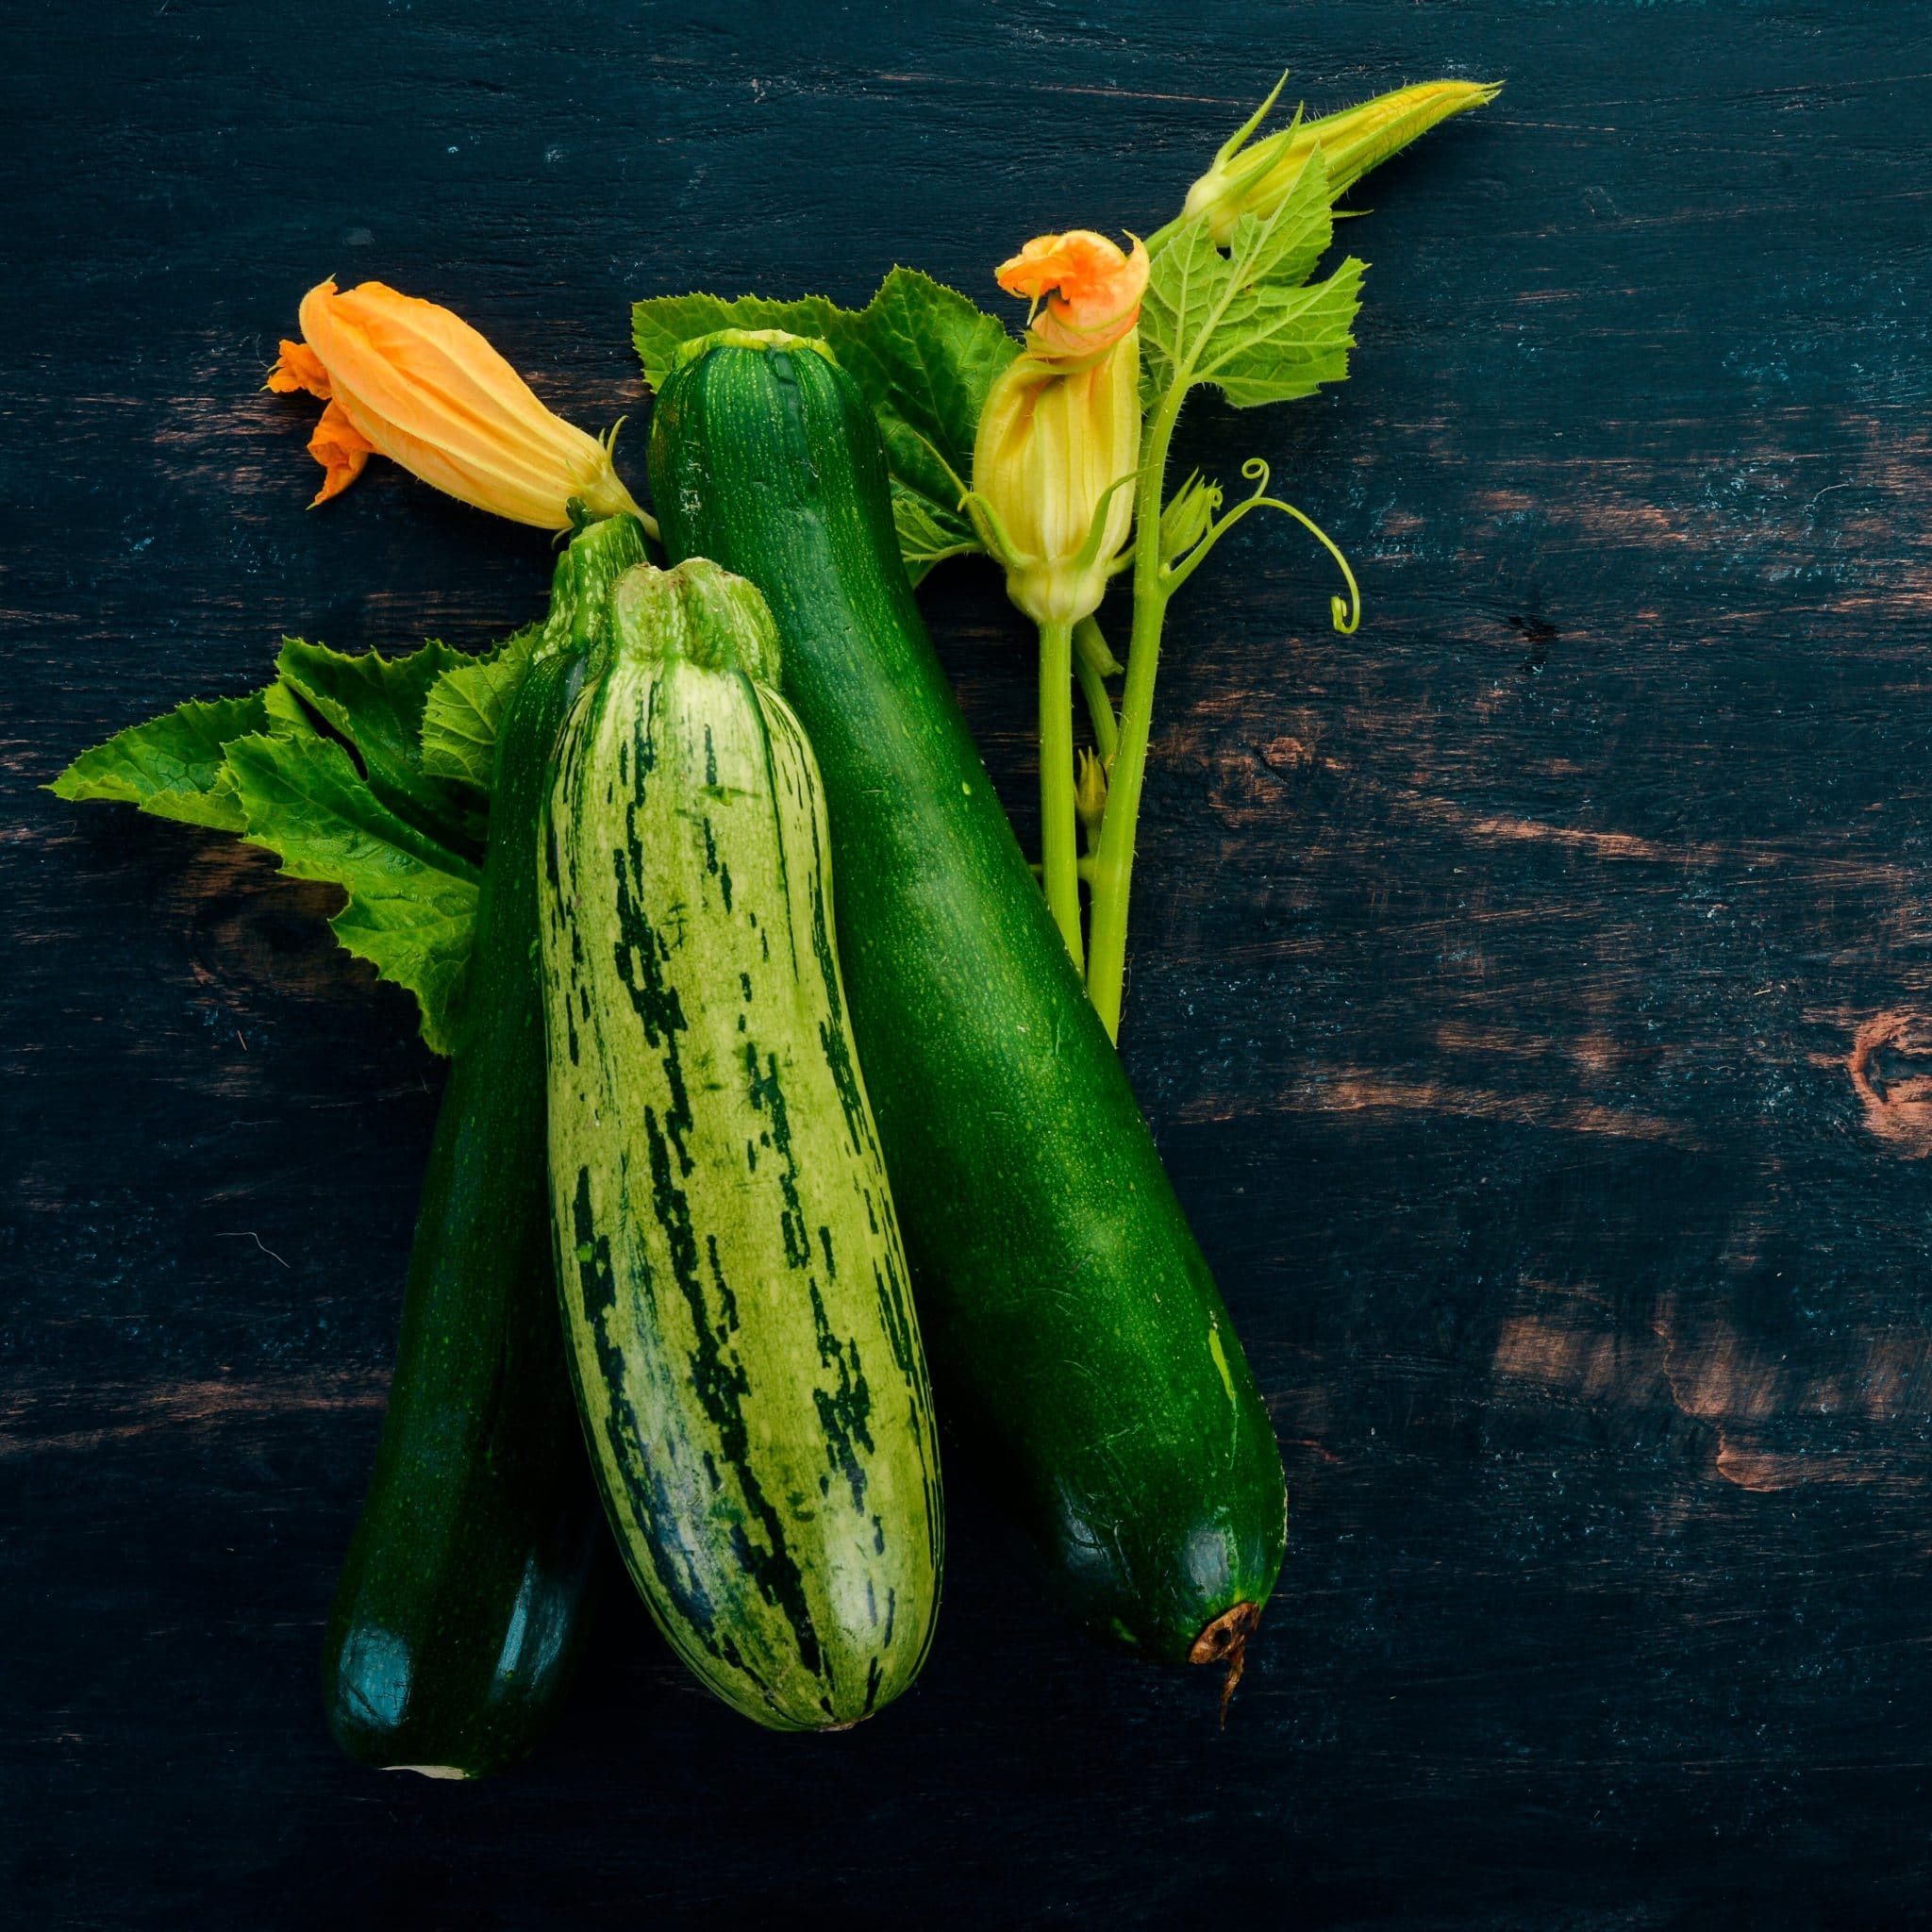 National Sneak Some Zucchini Onto Your Neighbor's Porch Day August 8